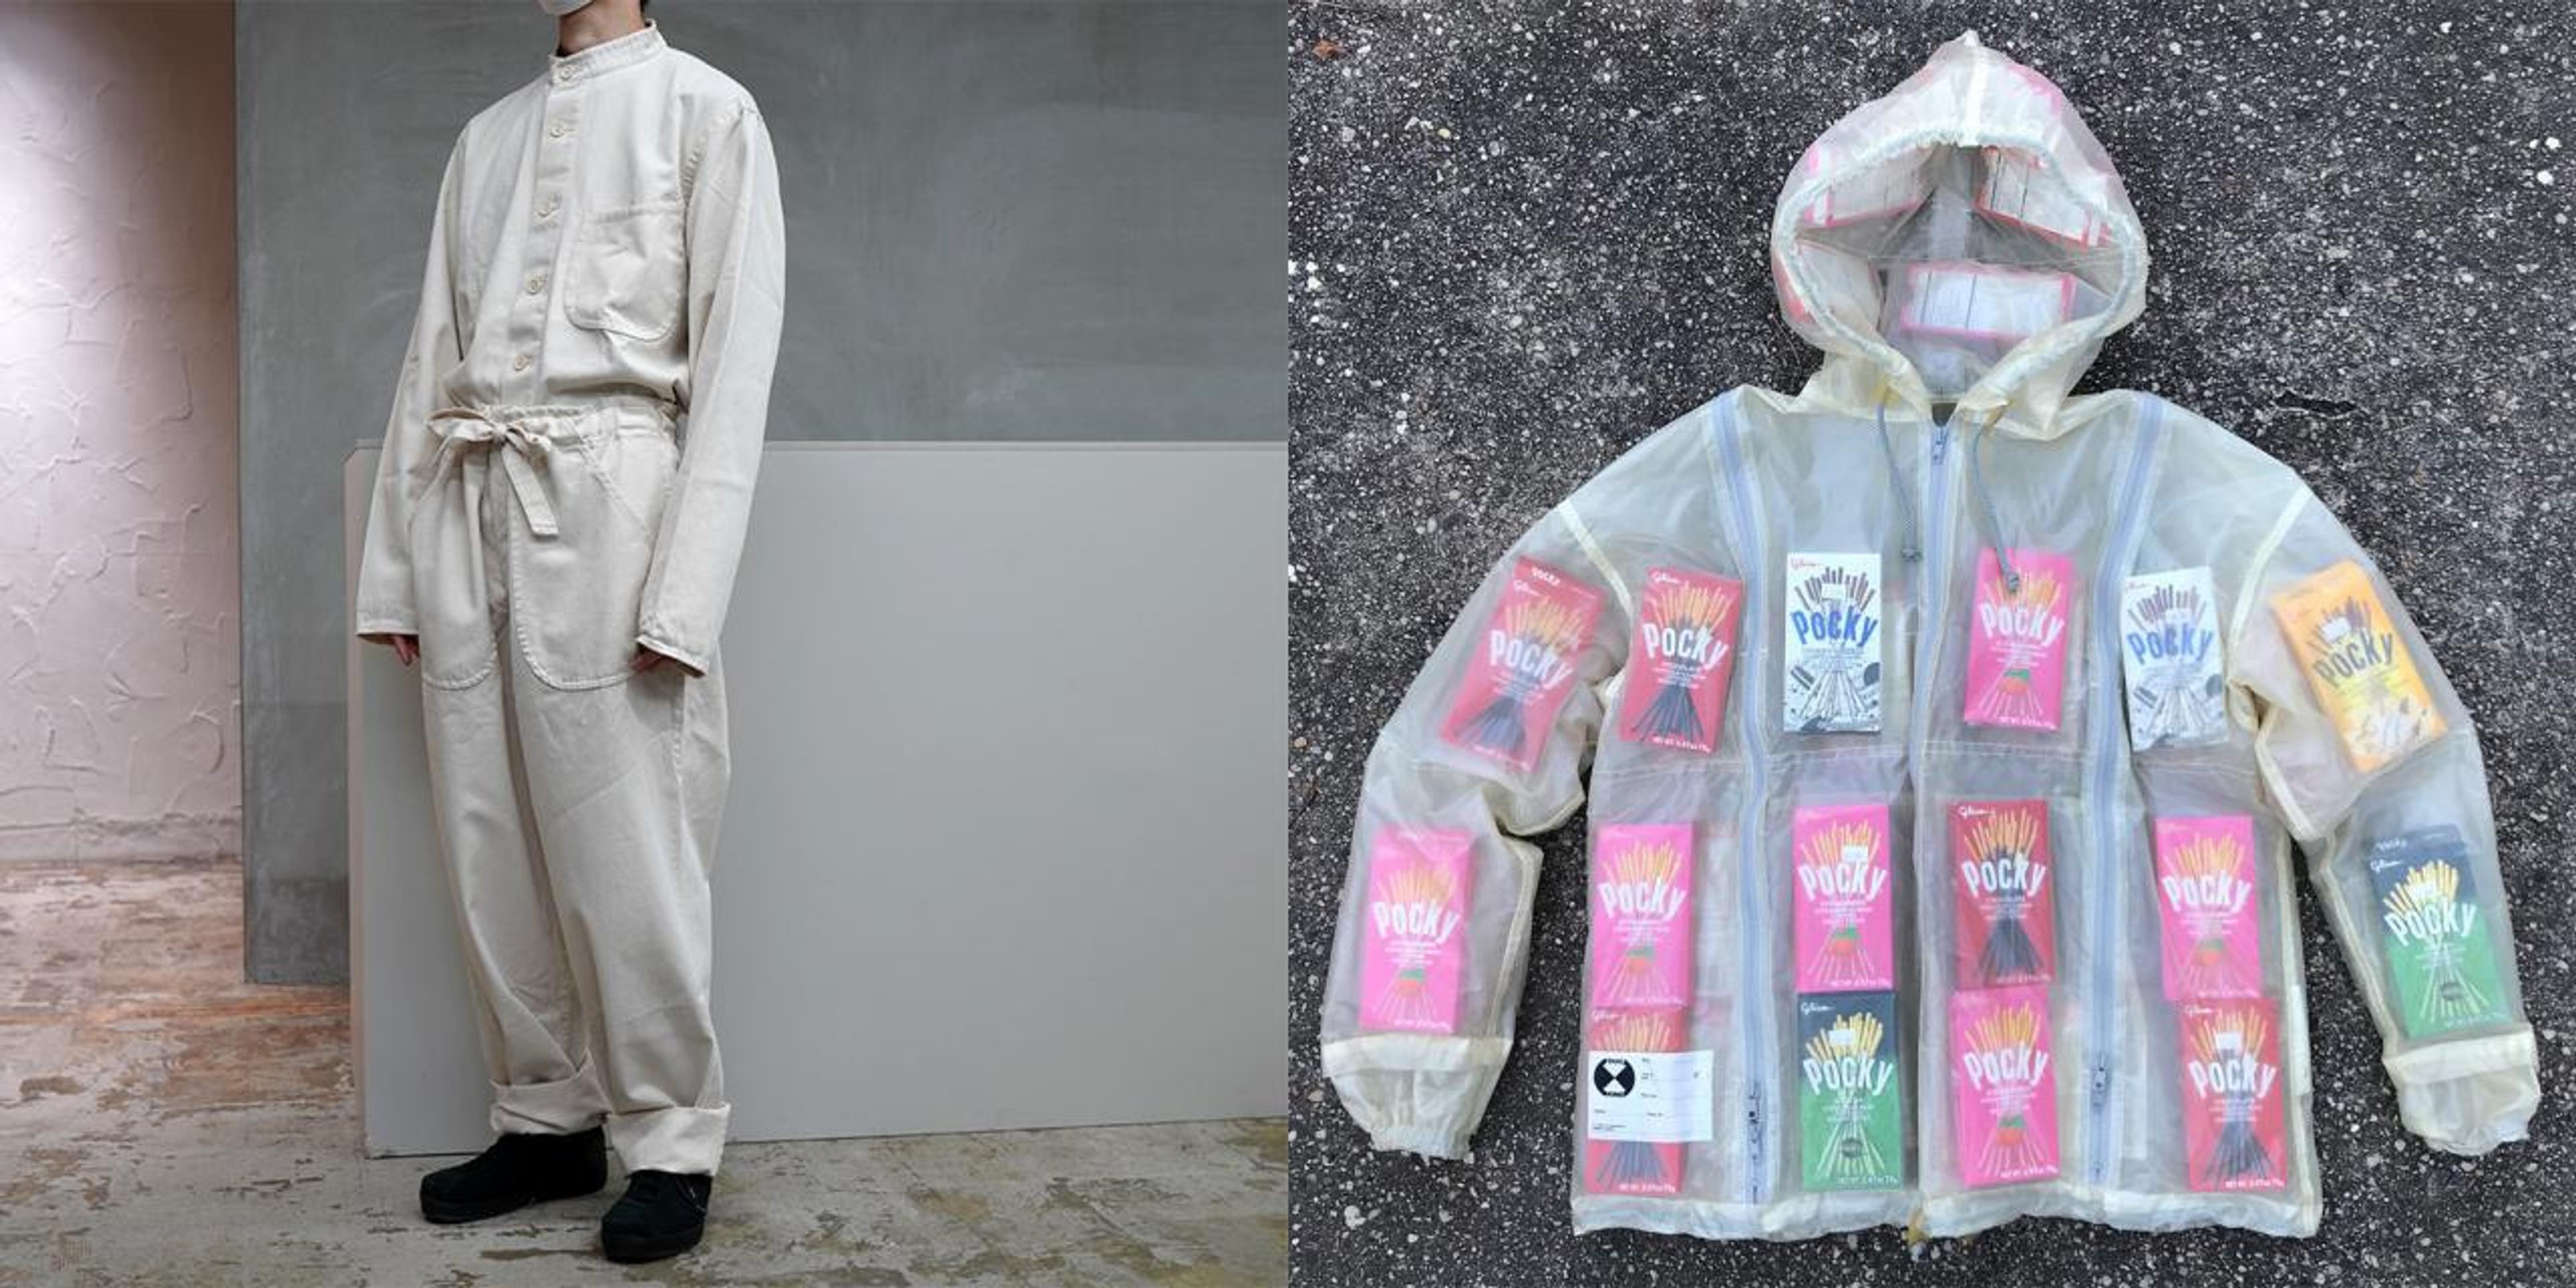 Old Town’s unity suit and Kosuke Tsumura’s Final Home multifunctional survival jacket